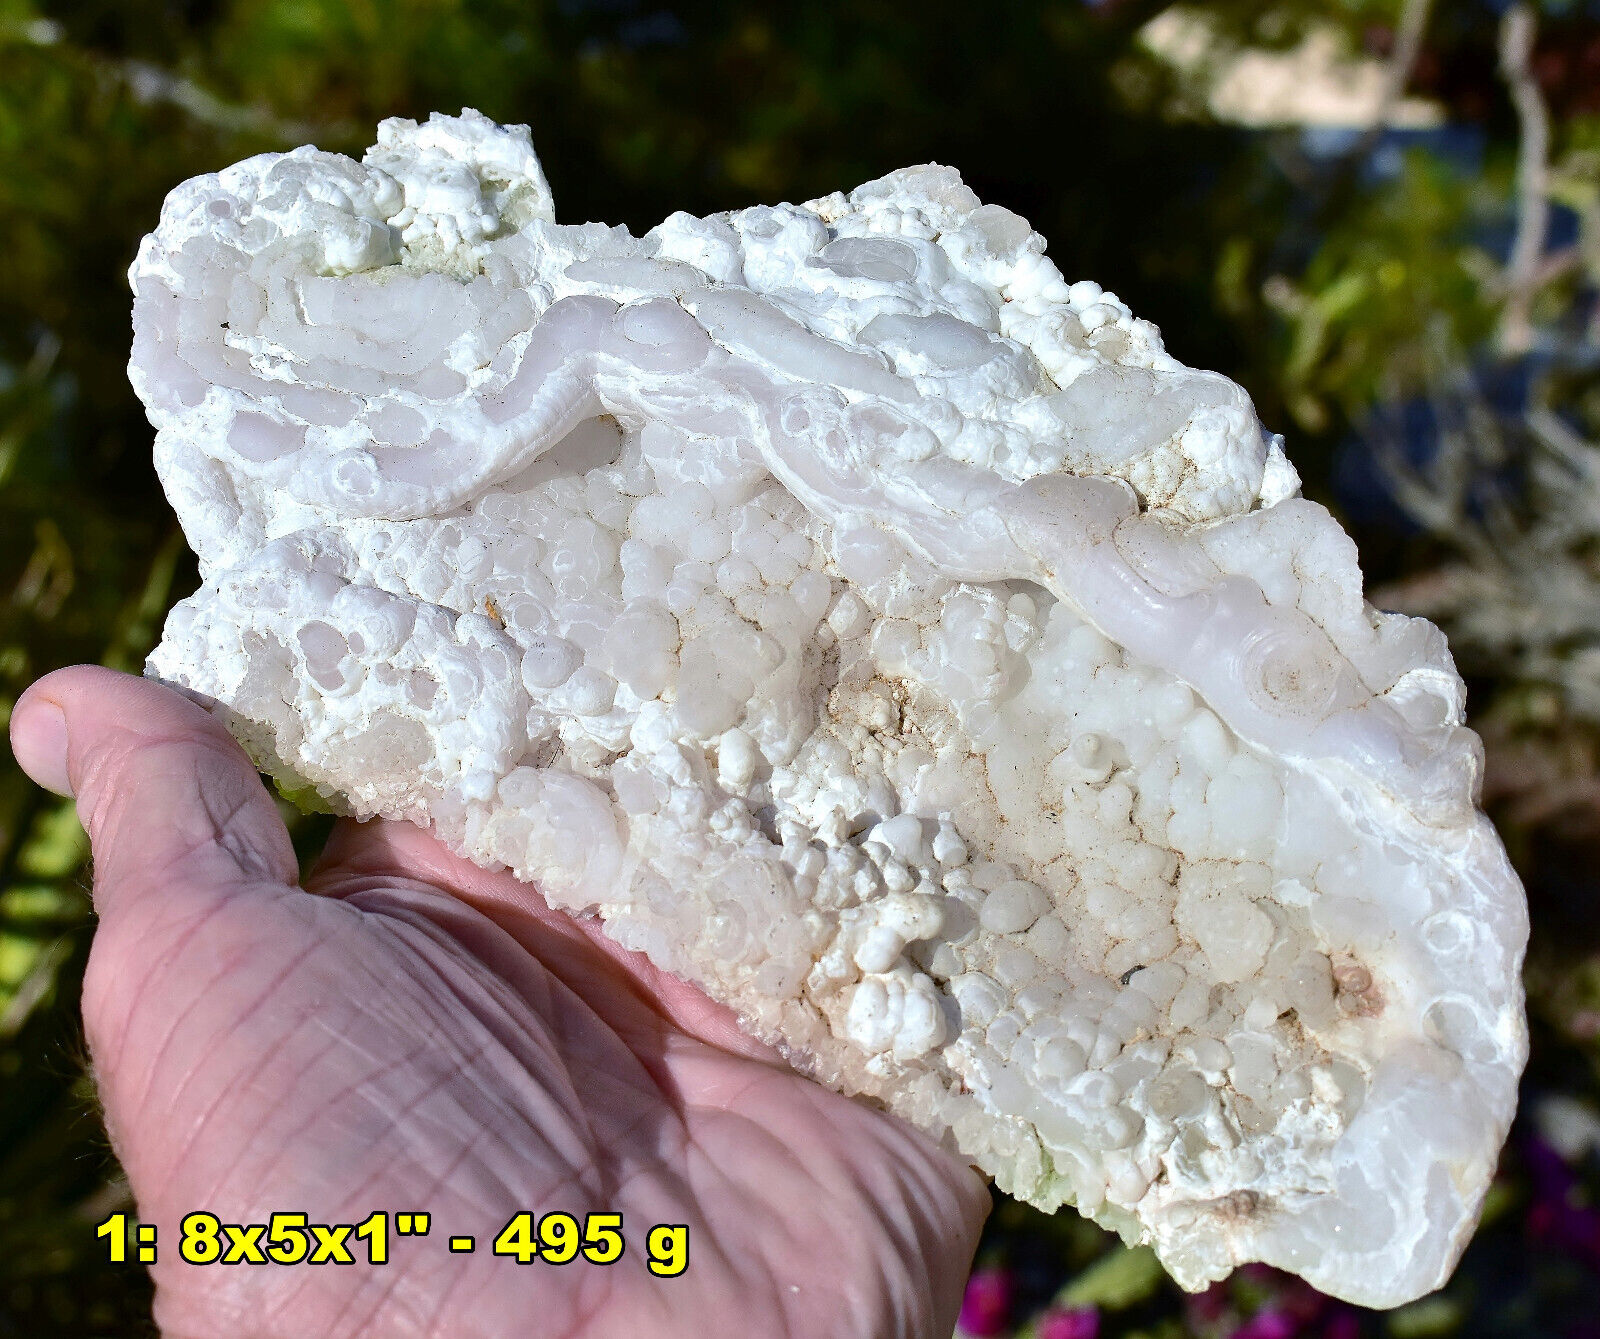 Large CHALCEDONY DESERT ROSES * Choose from 10 Natural Mineral Specimens - U.S.